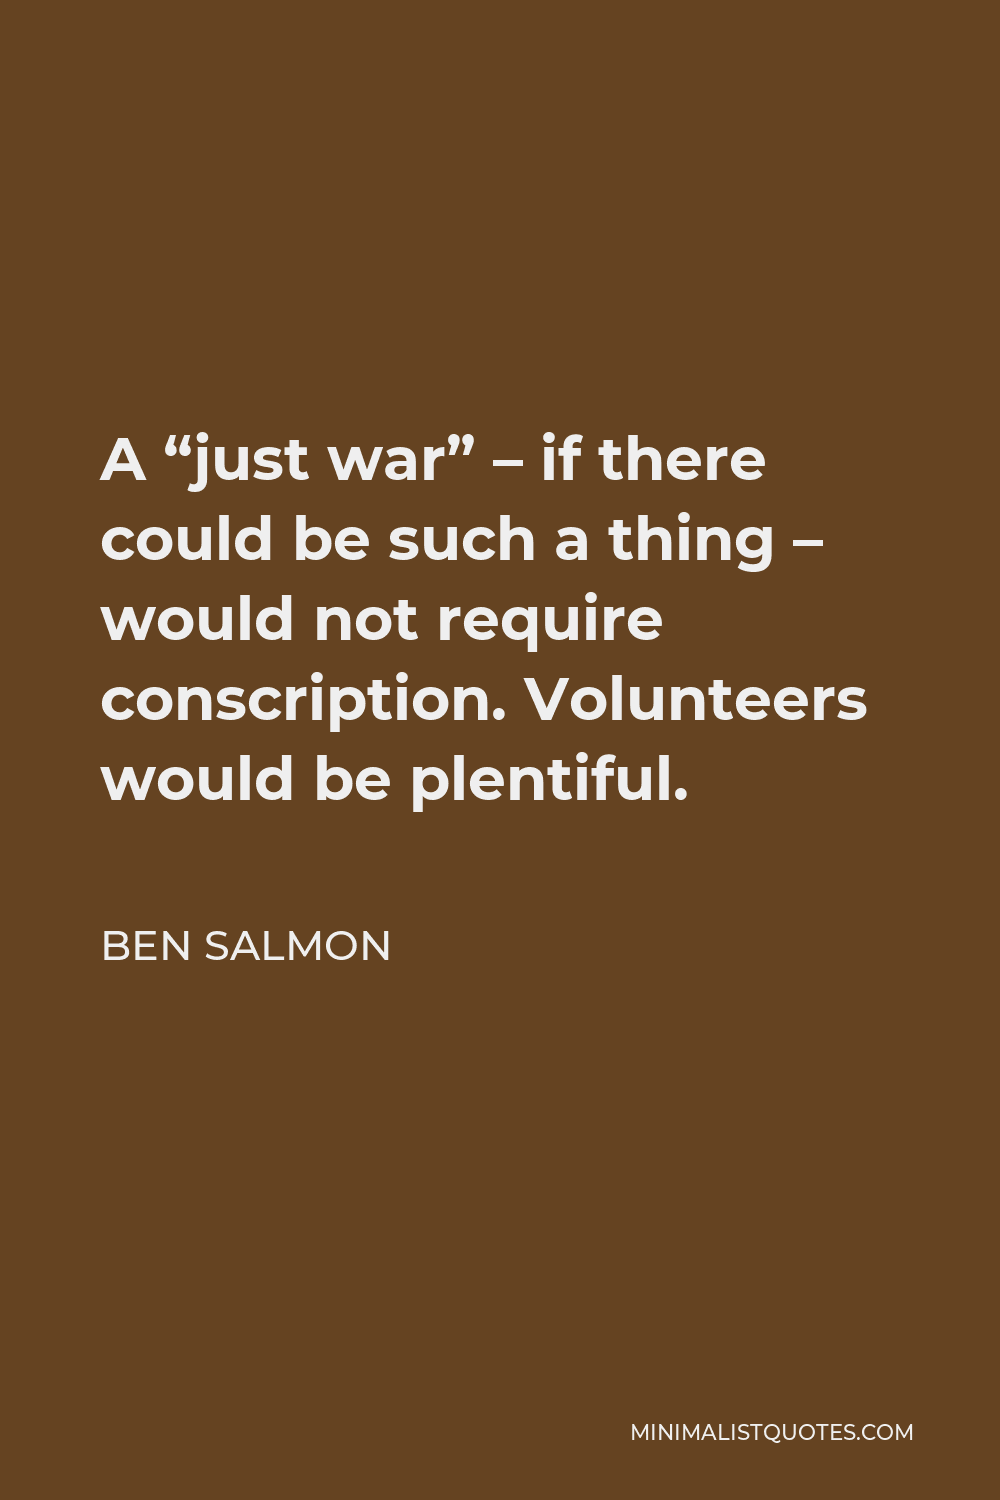 Ben Salmon Quote - A “just war” – if there could be such a thing – would not require conscription. Volunteers would be plentiful.